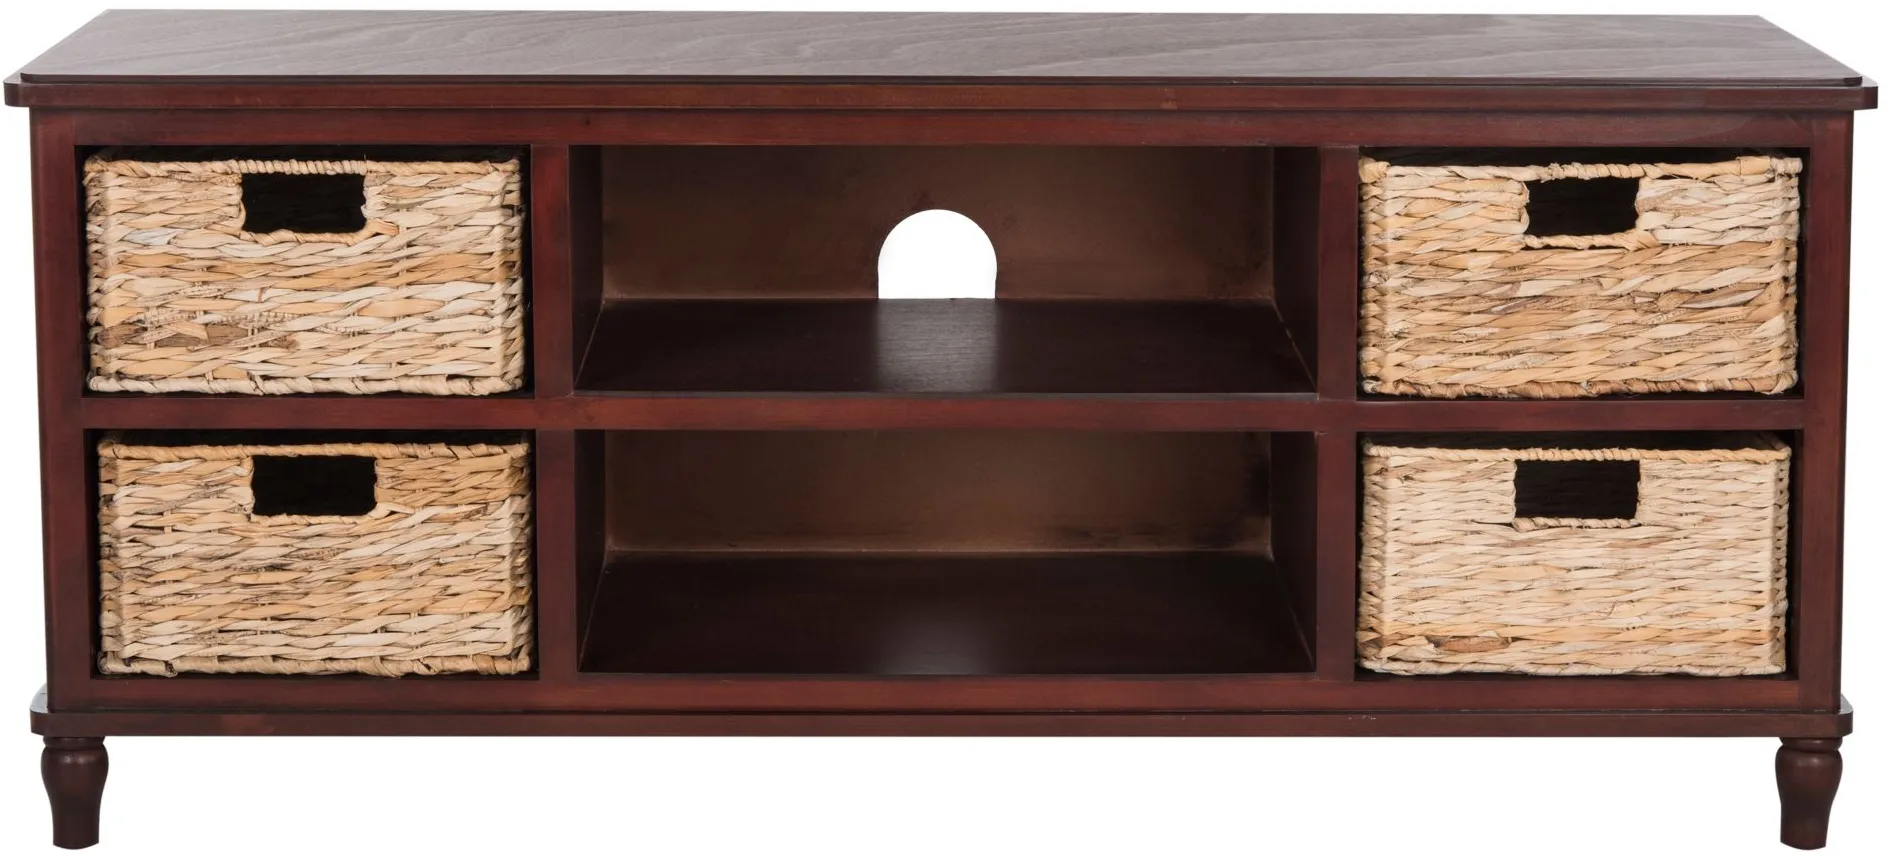 Manny TV Console in Cherry by Safavieh